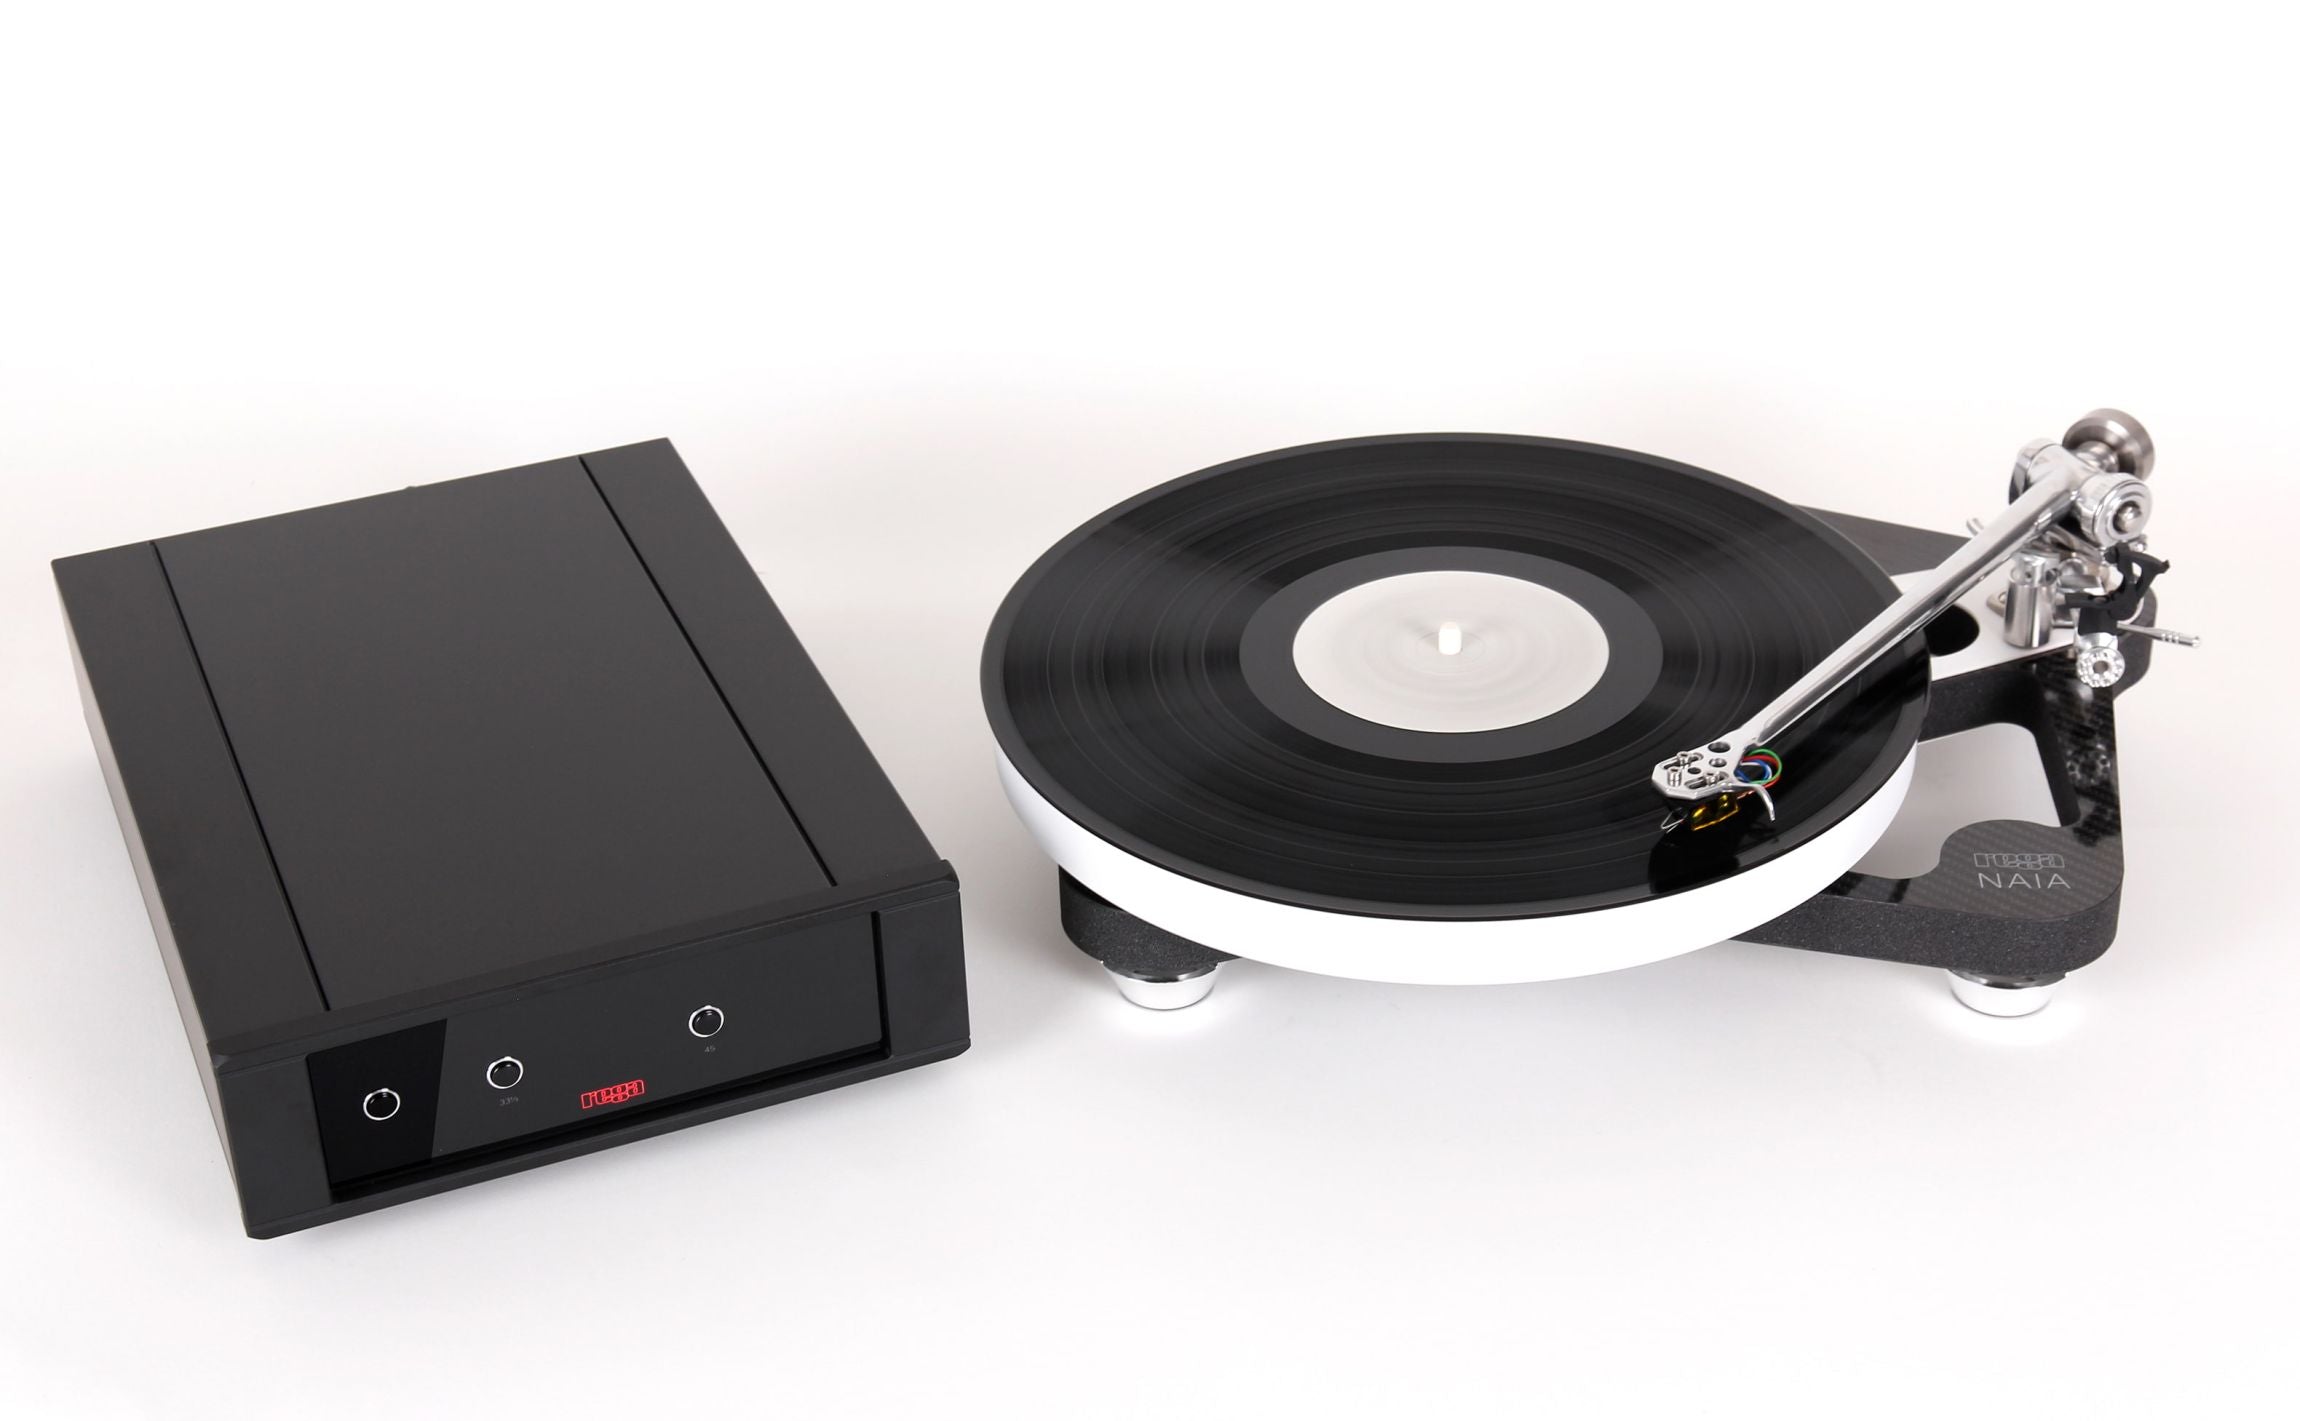 Rega Naia Reference Turntable (Available to Demo)